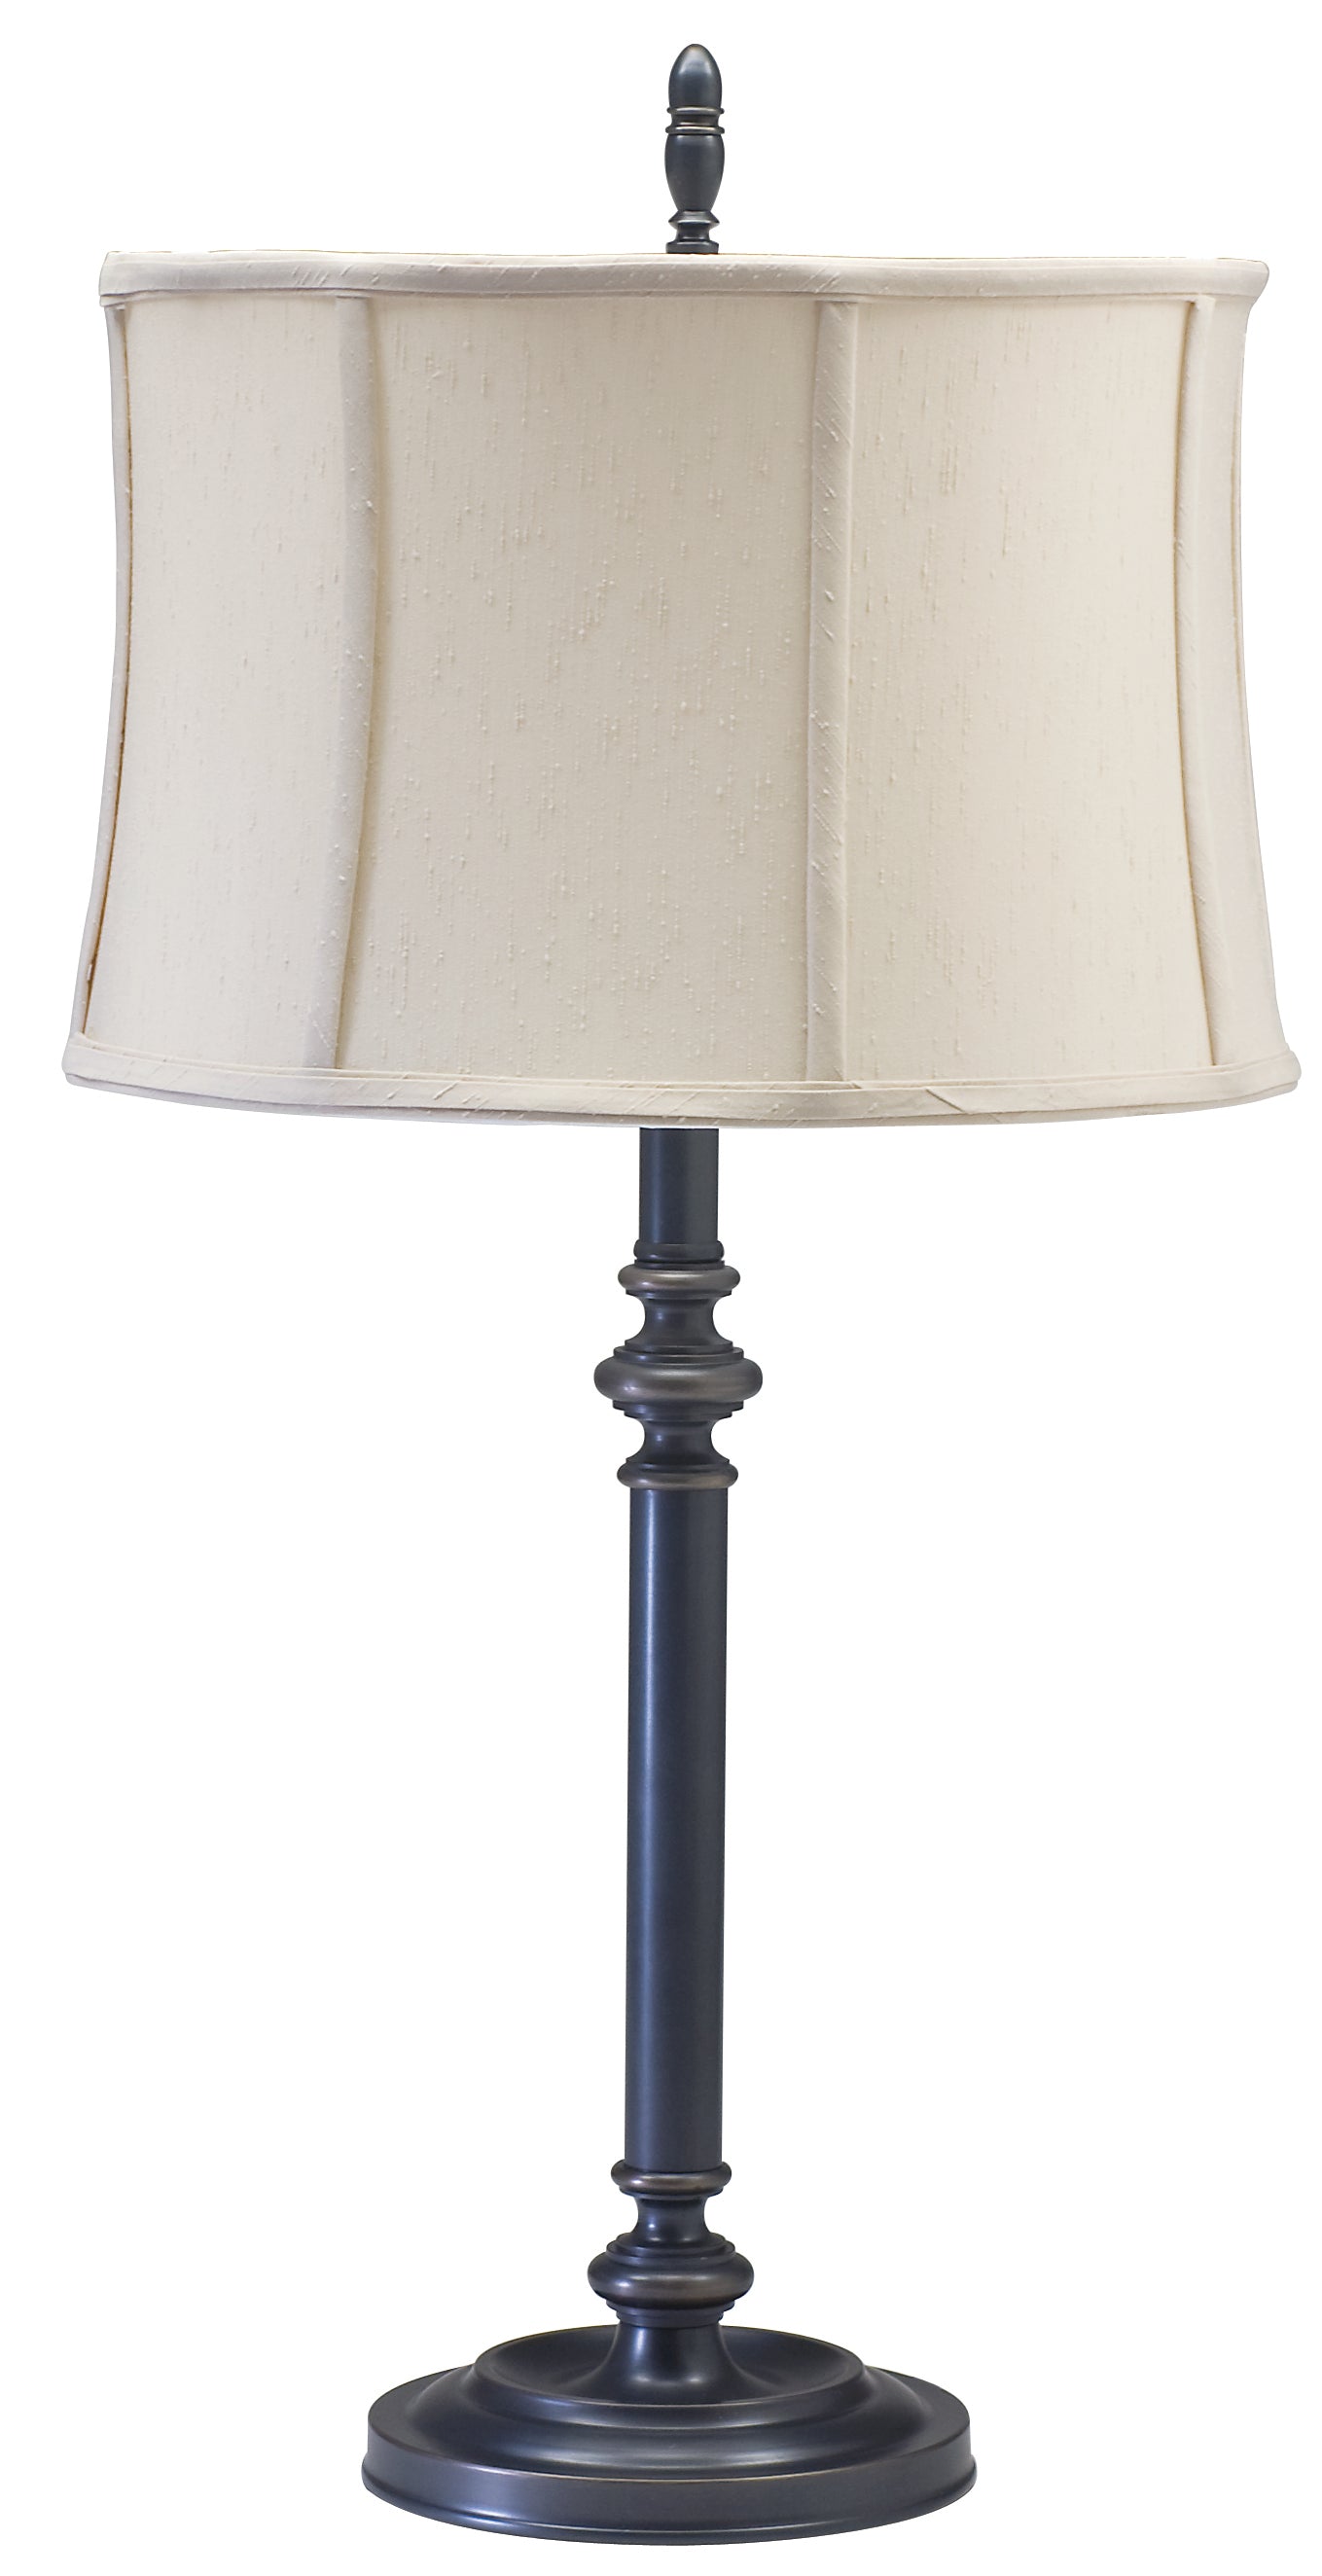 House of Troy Coach 30" Oil Rubbed Bronze Table Lamp CH850-OB